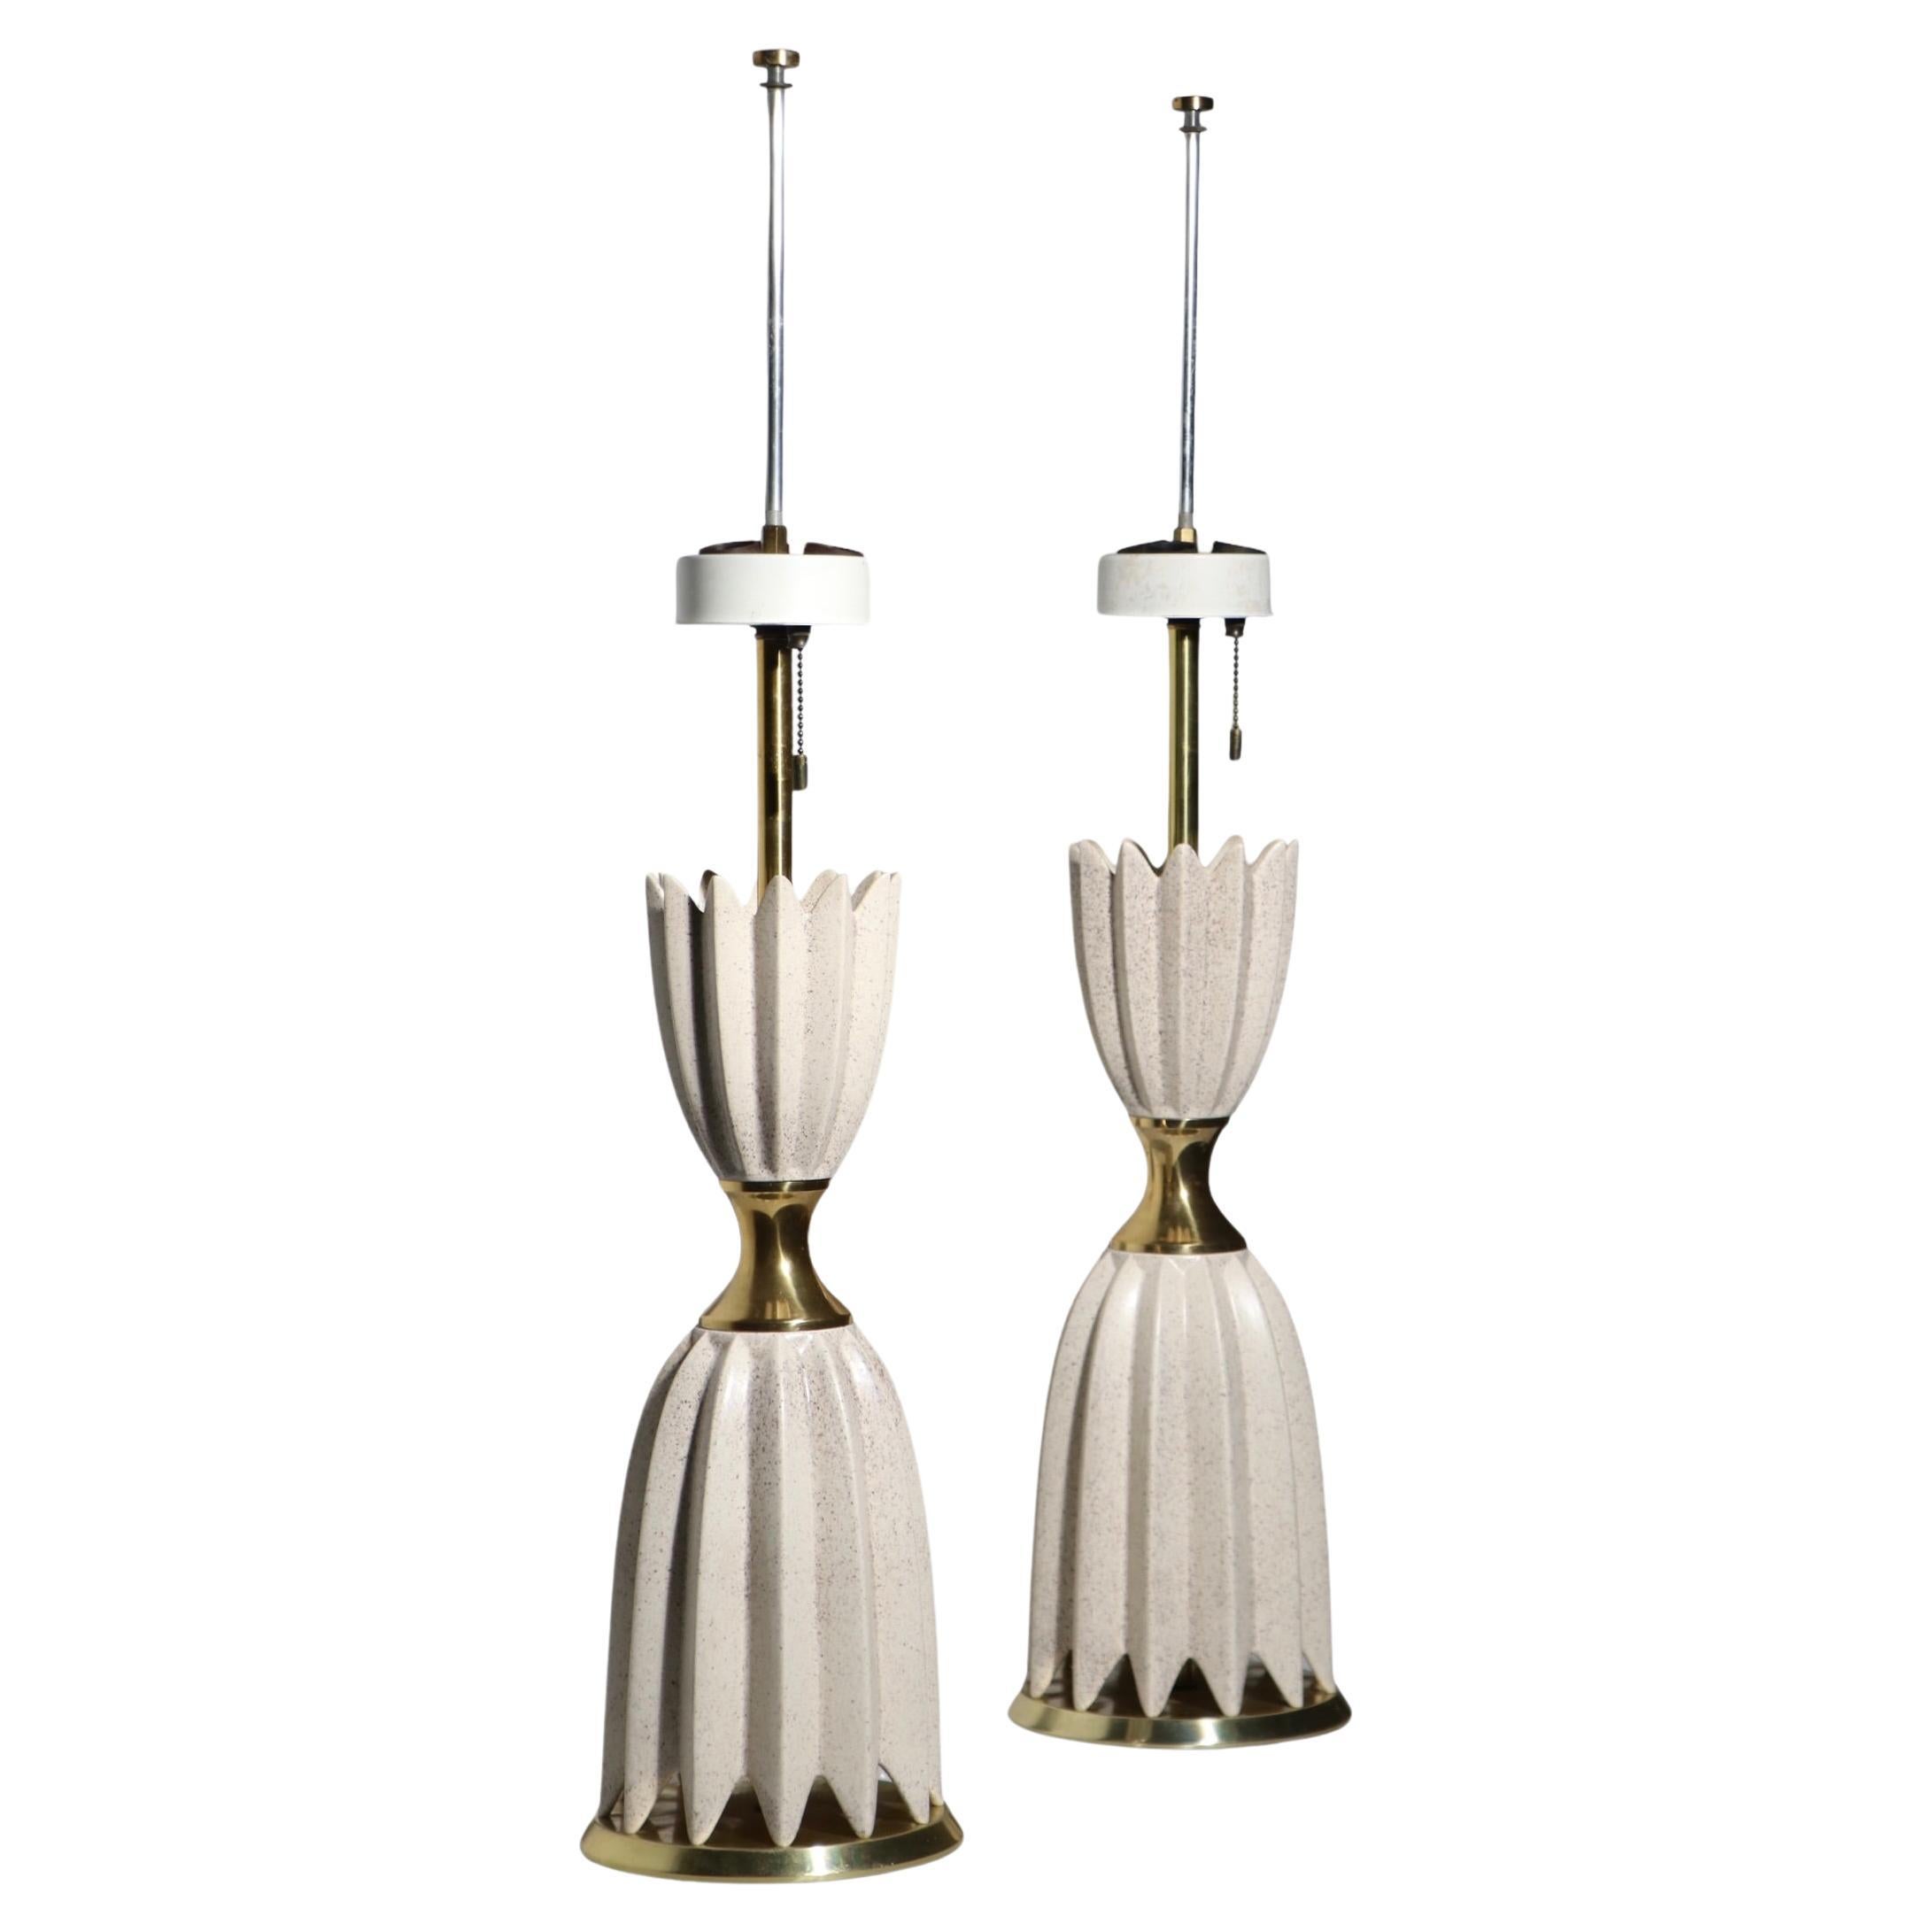 Pr Mid Century Hollywood Regency Table Lamps by Gerald Thurston for Lightolier 